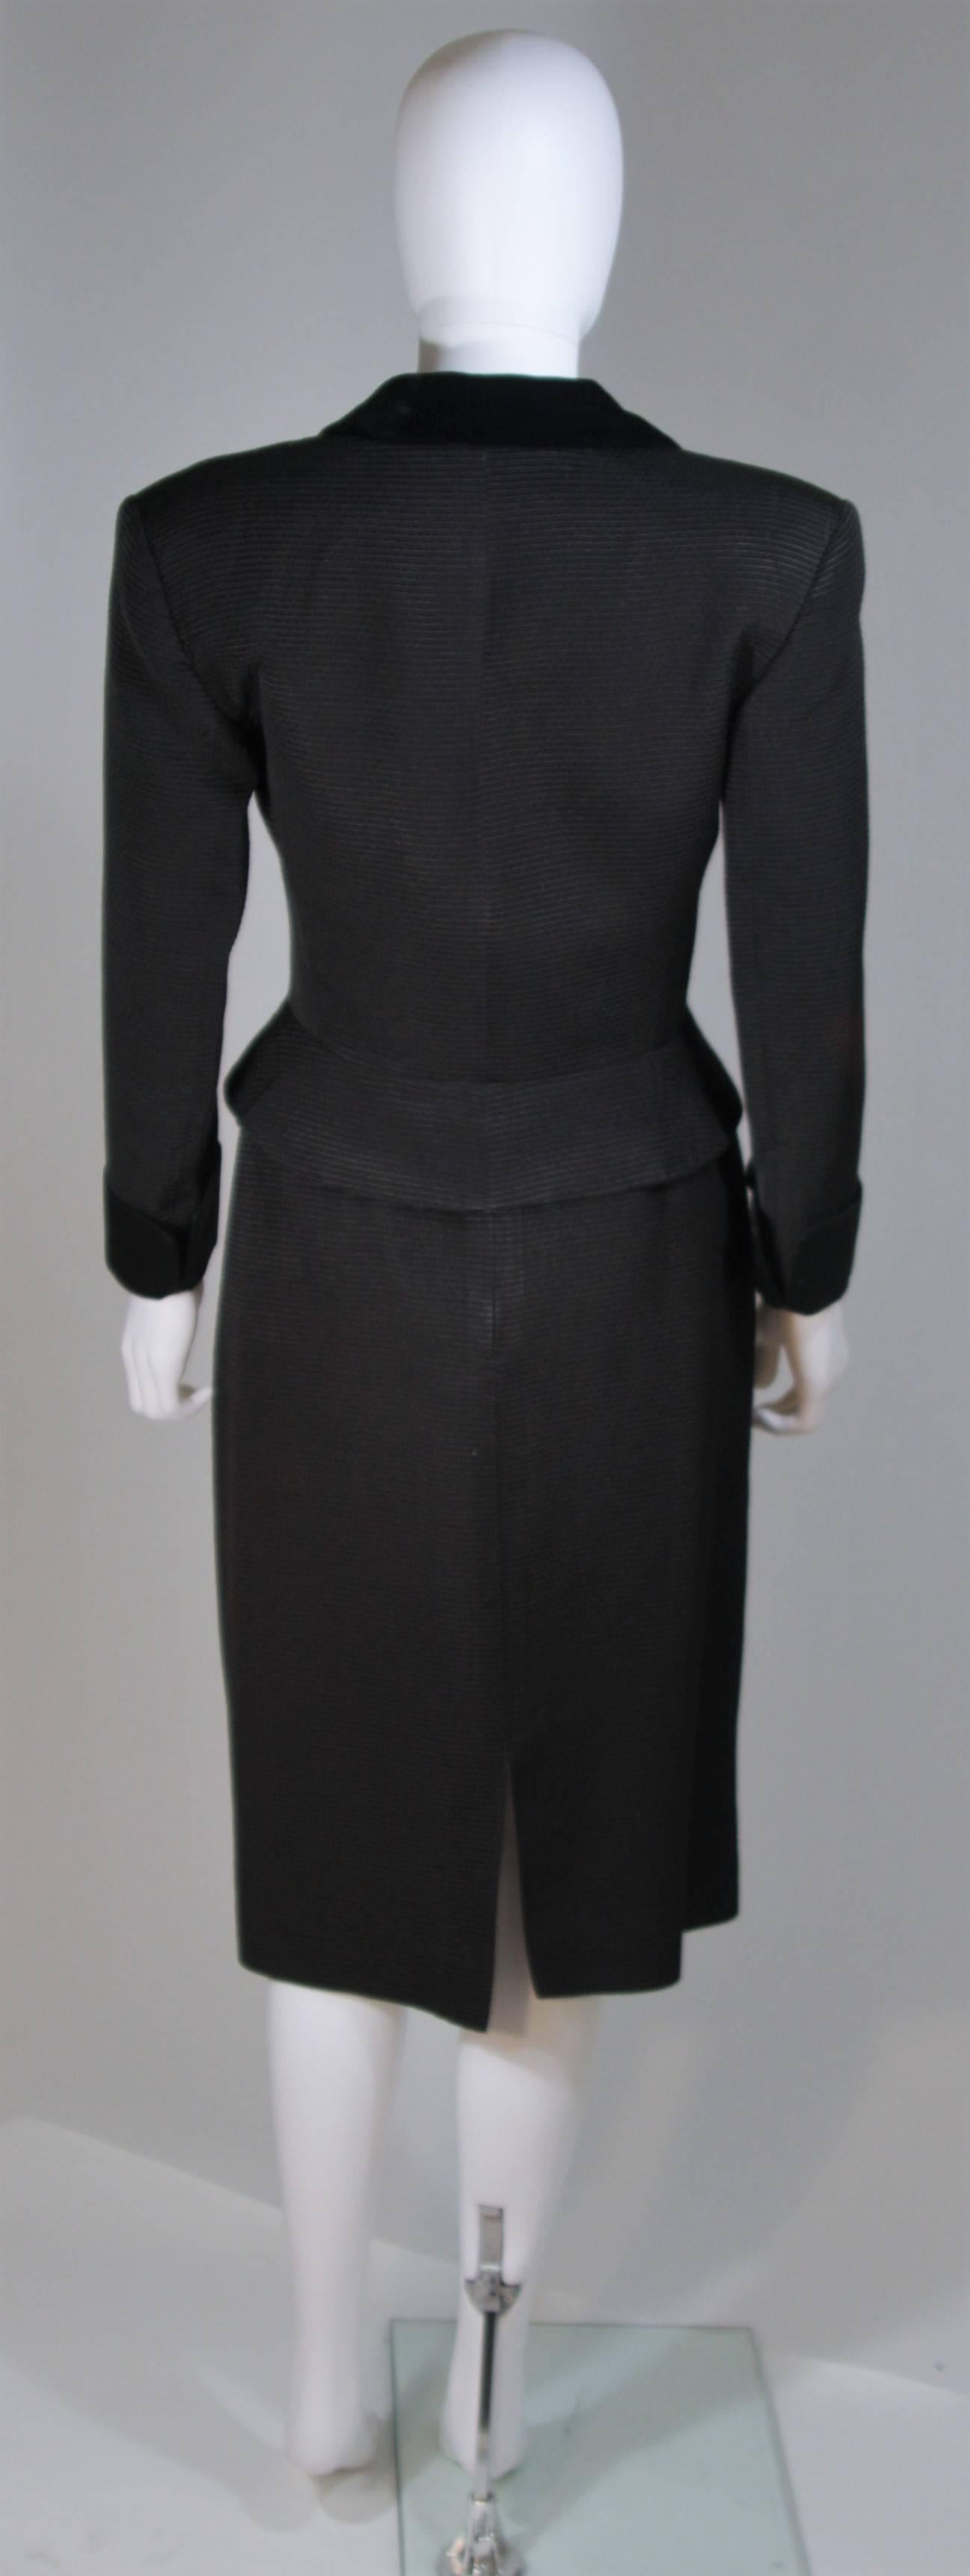 CARVEN BOUTIQUE Black Pintuck Skirt Suit with Velvet and Satin Trim Size 4-6 For Sale 2